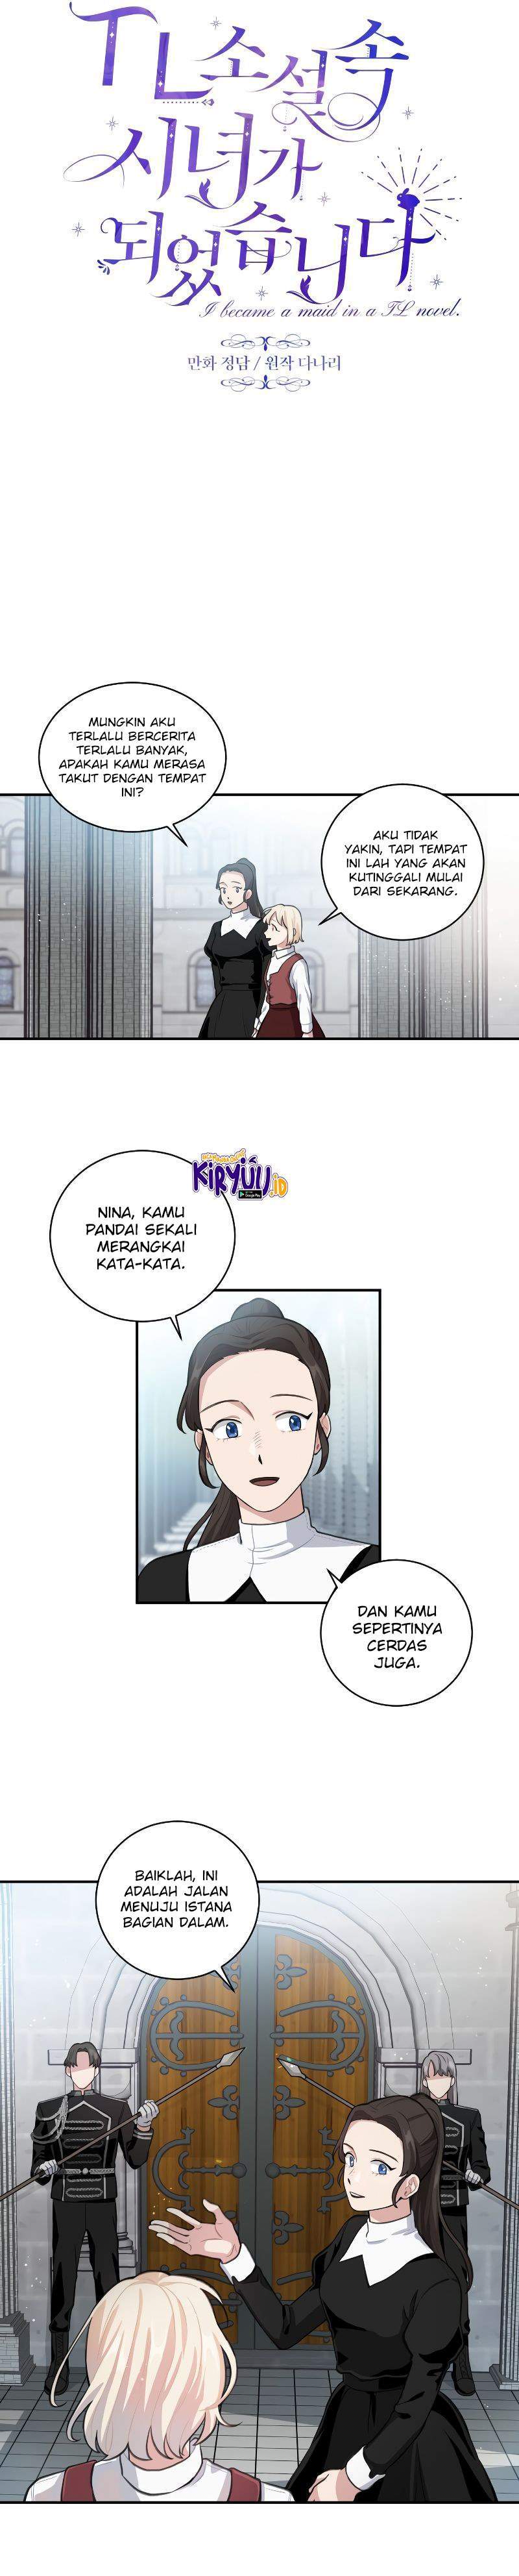 I Became a Maid in a TL Novel Chapter 3 5